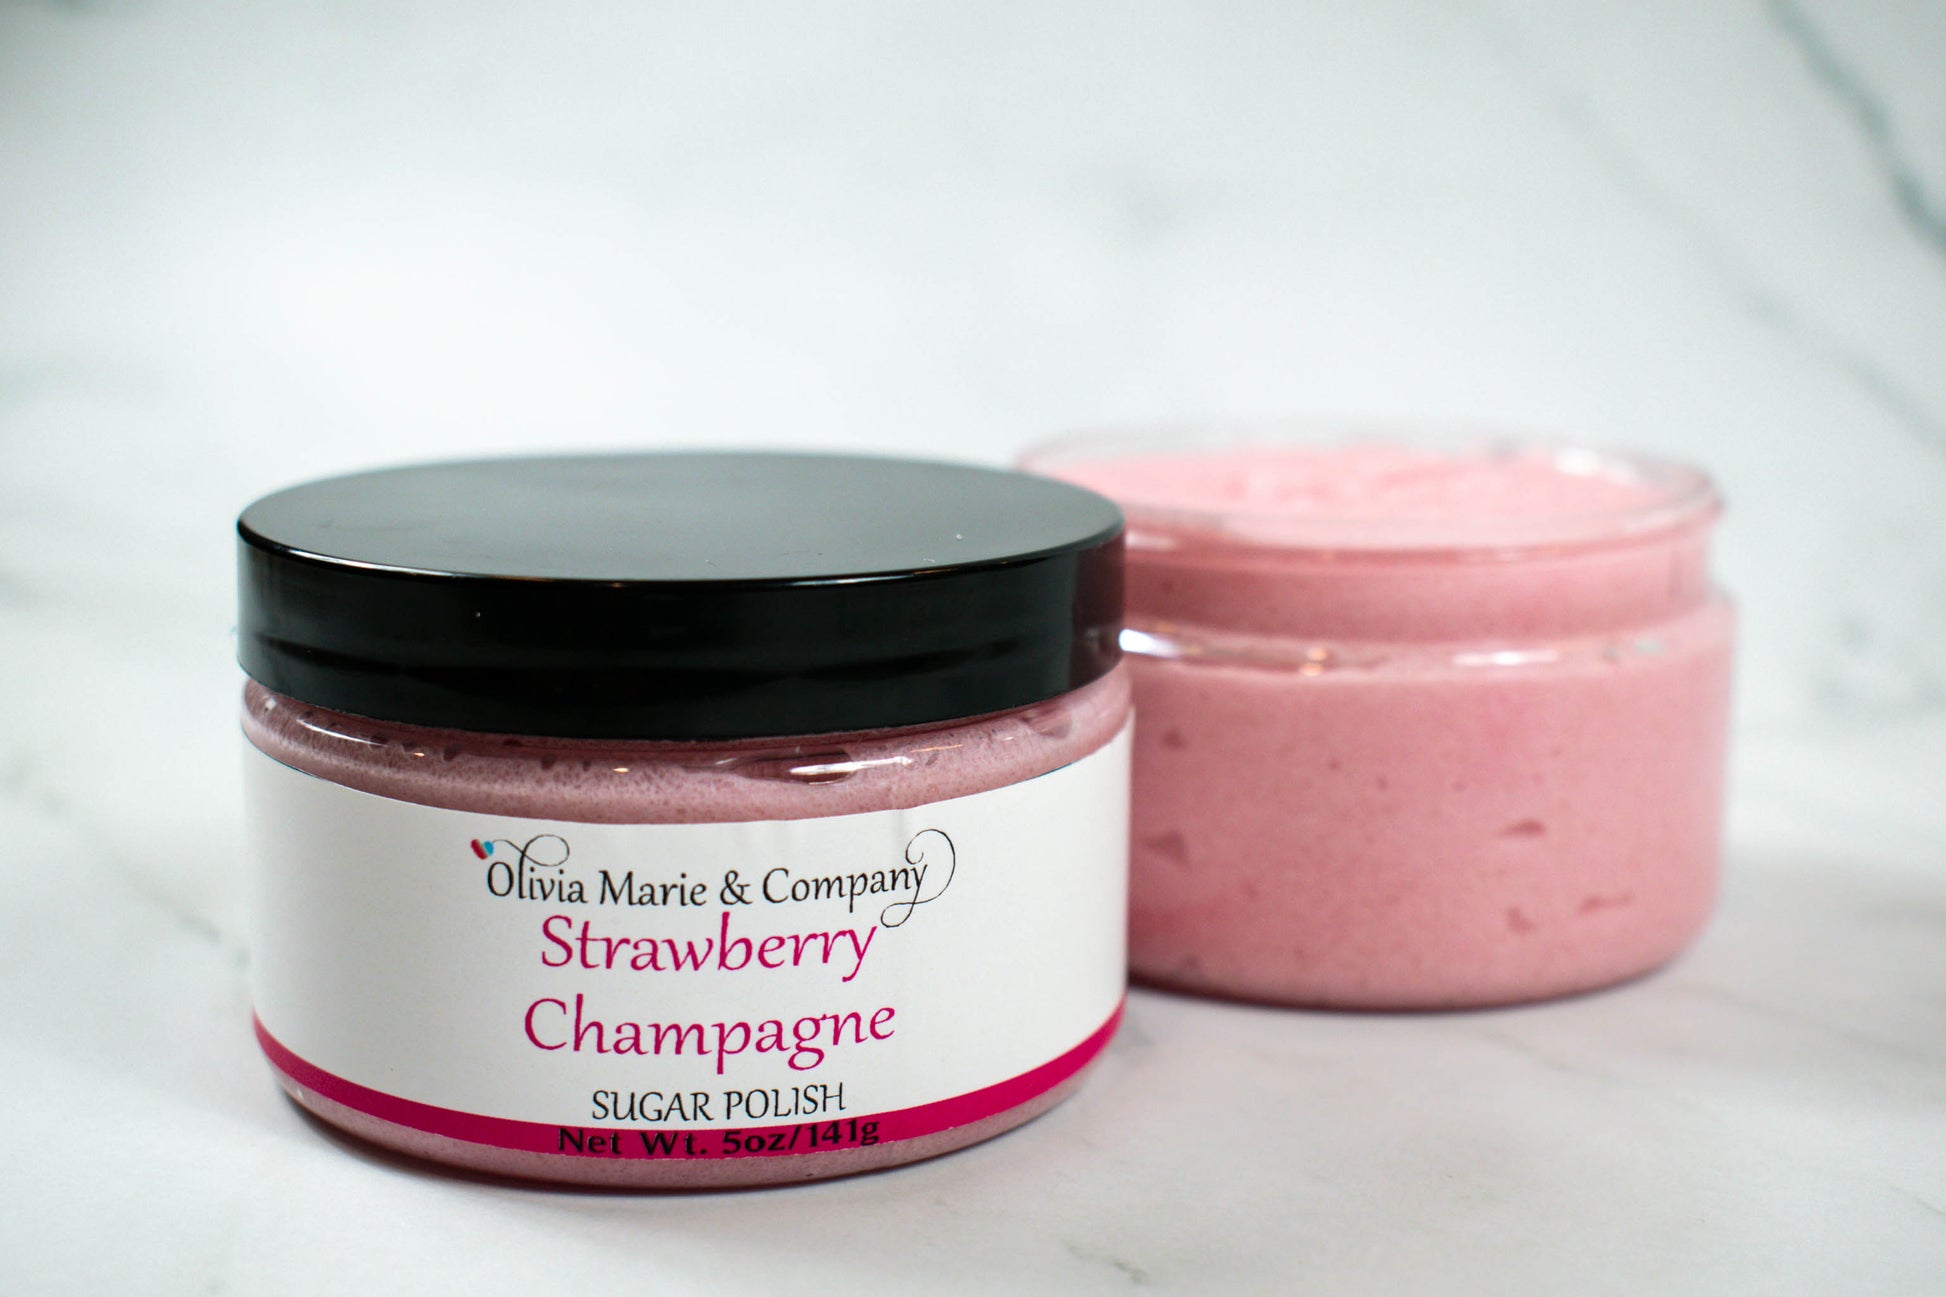 Strawberry champagne scrub is colored in pink.